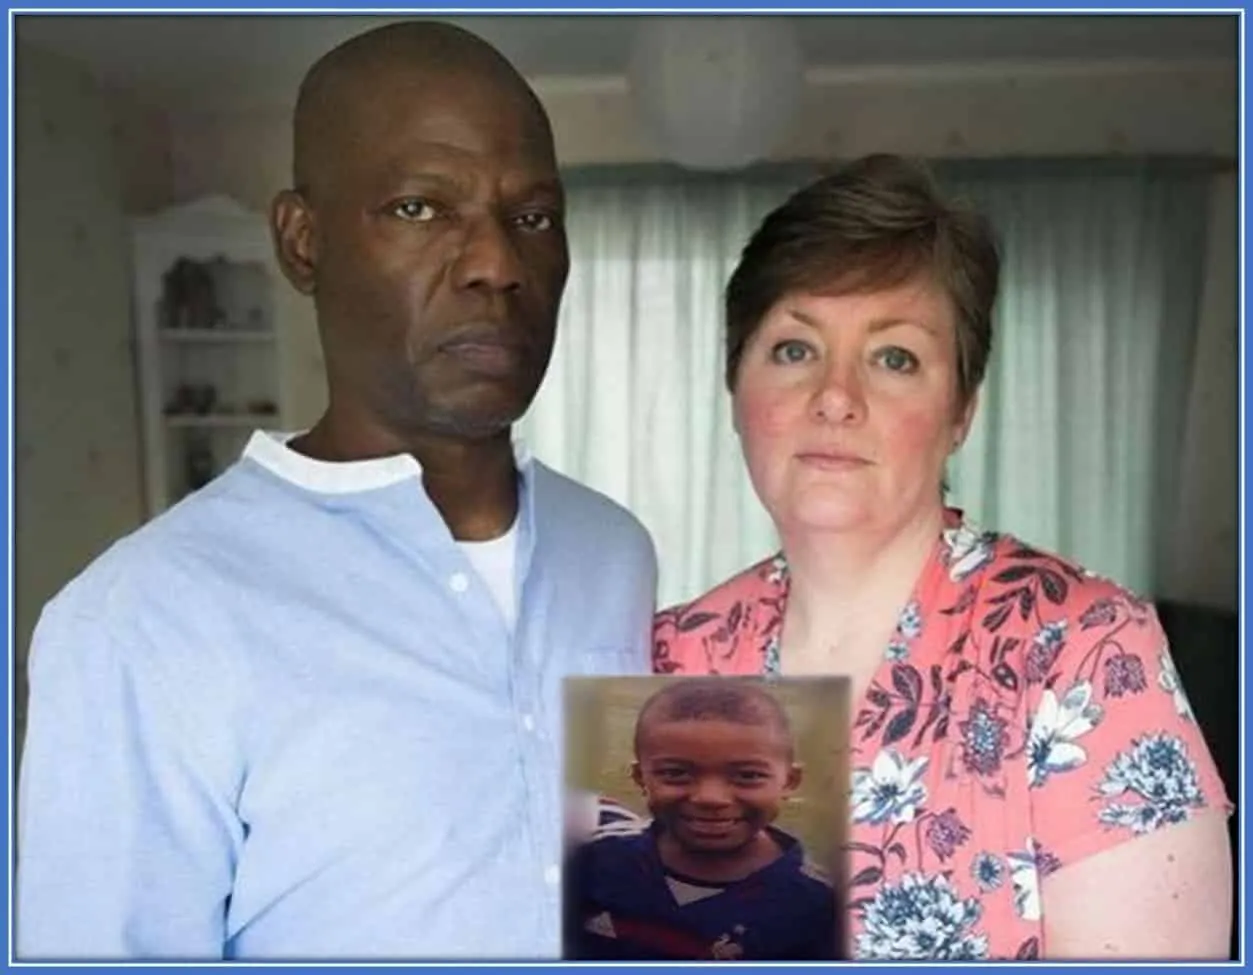 Meet Kylian Mbappe's parents - his Dad, Wilfried and Mum, Fayza Lamari. As observed, the footballer comes from a mixed-race ethnic background.